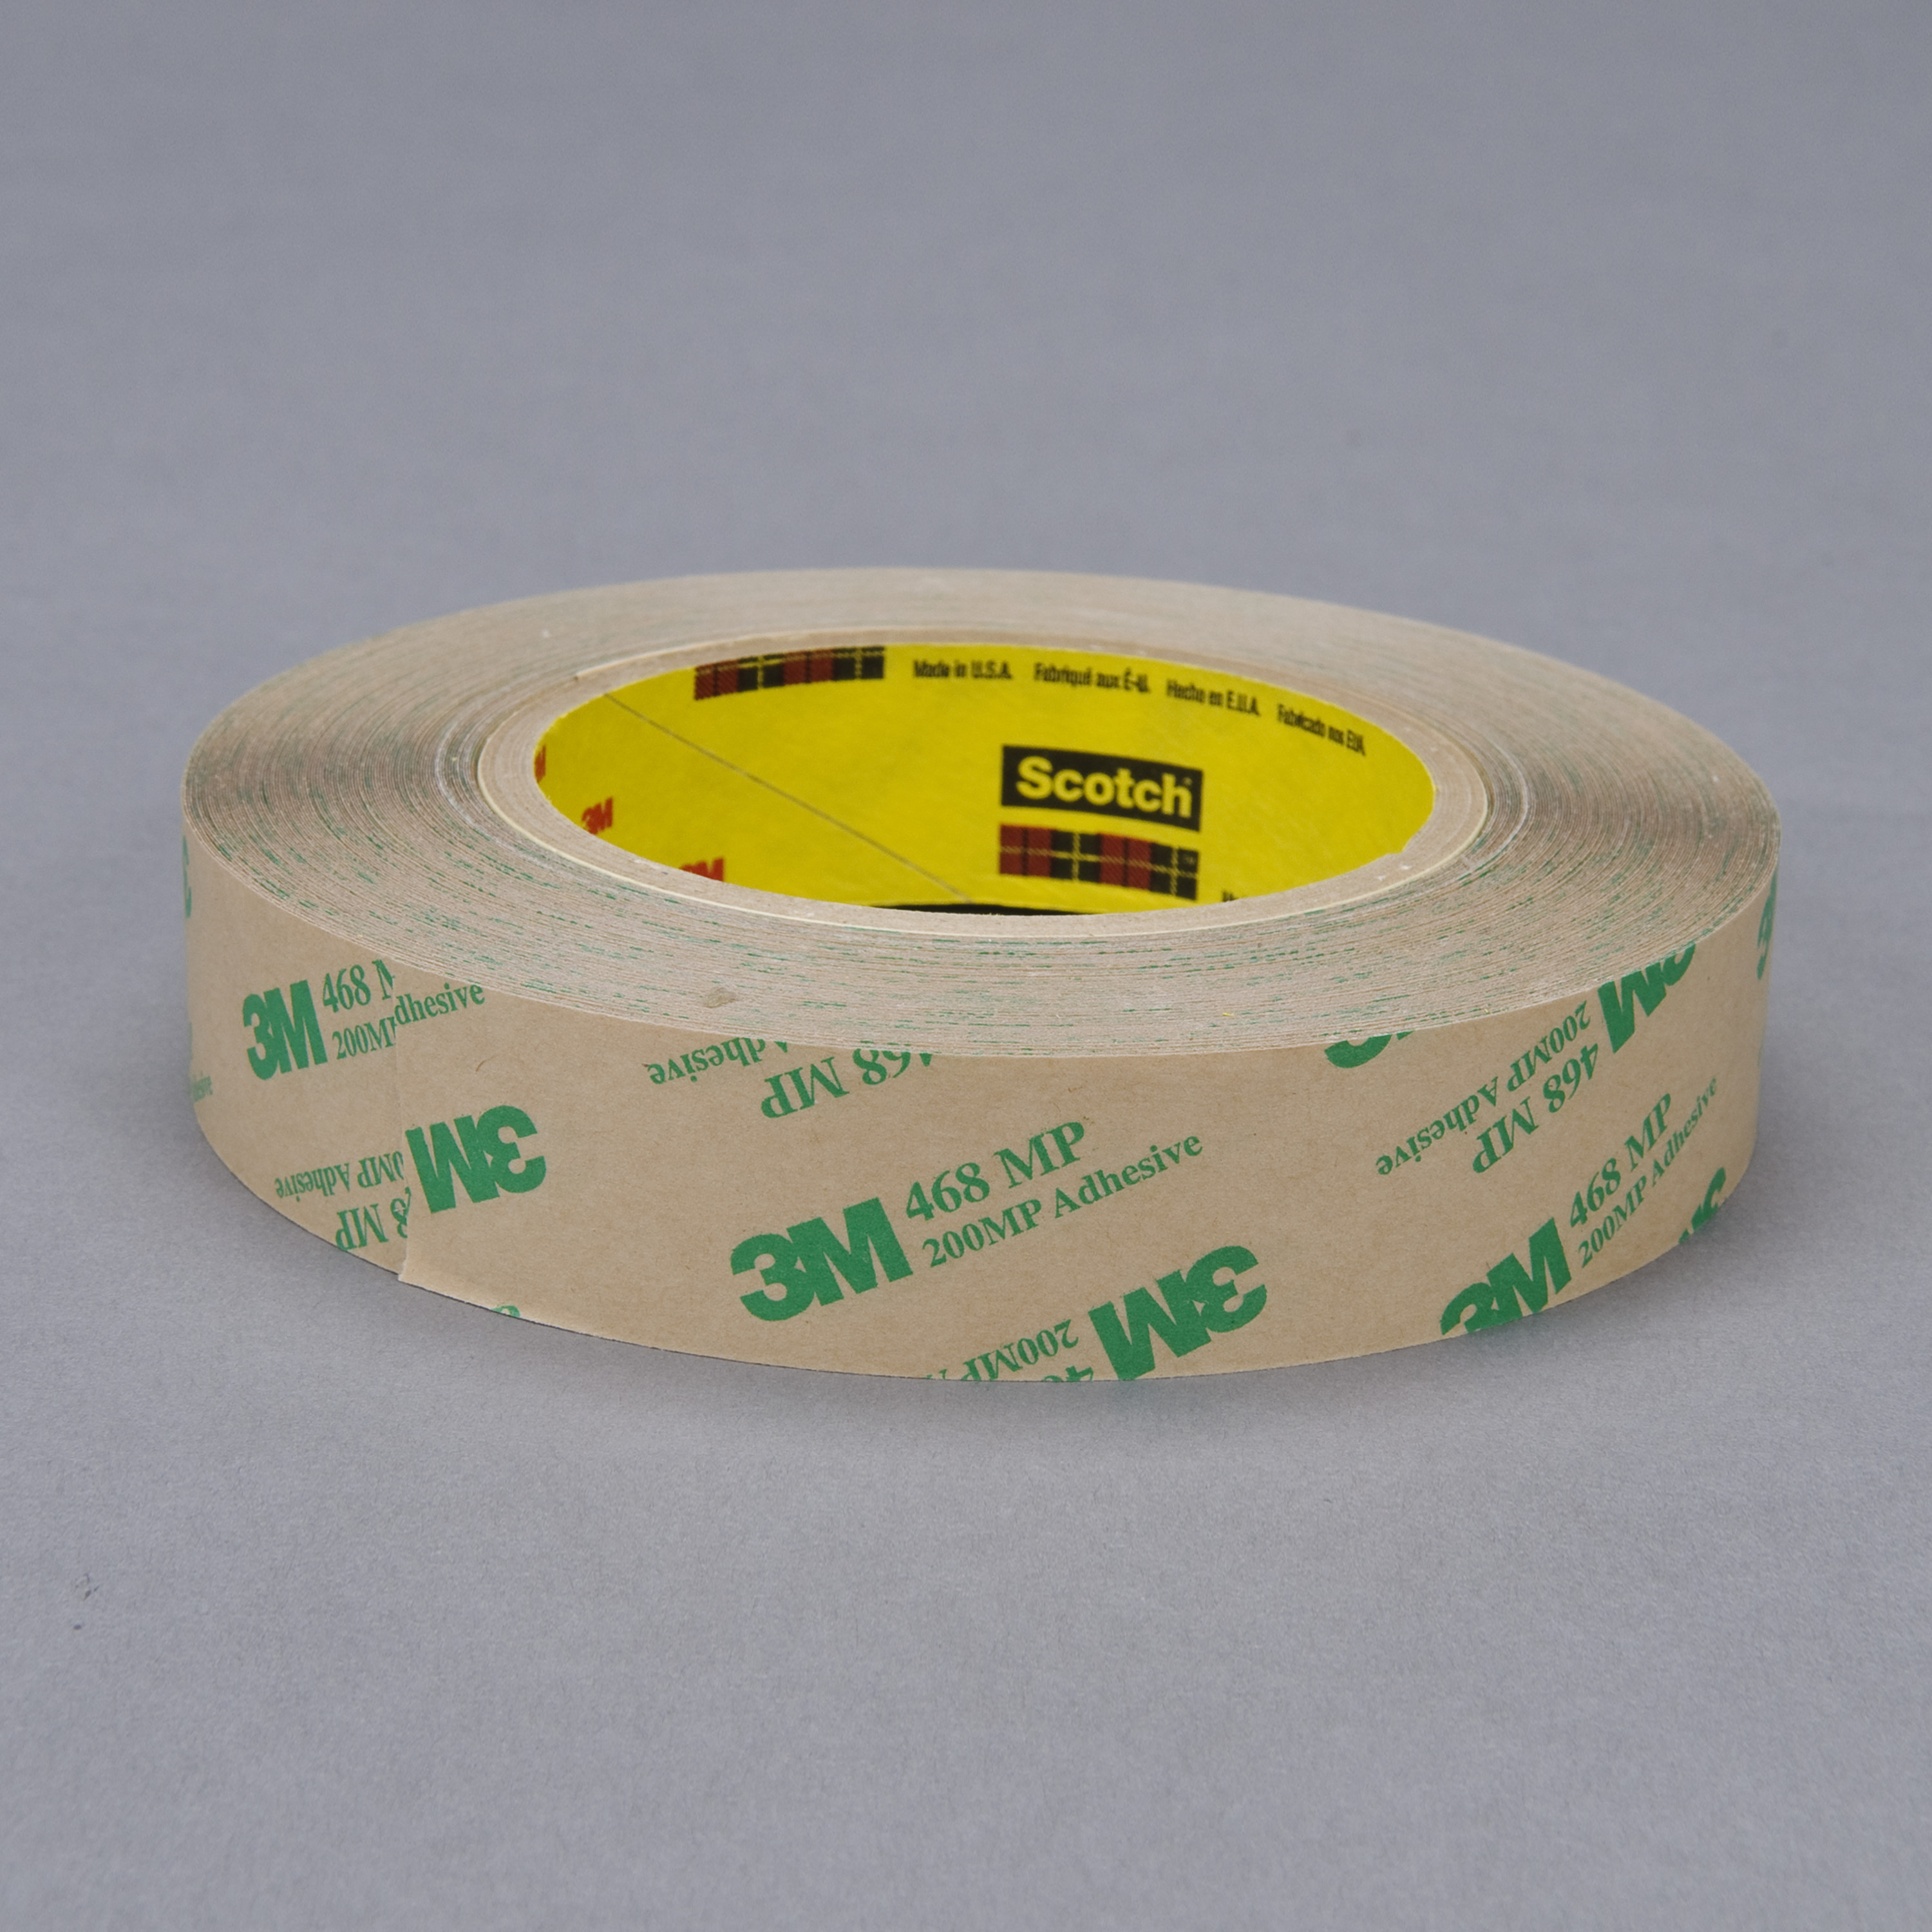 3M™ Adhesive Transfer Tape 468MP, Clear, 6 in x 60 yd, 5 mil, 8 rolls
per case